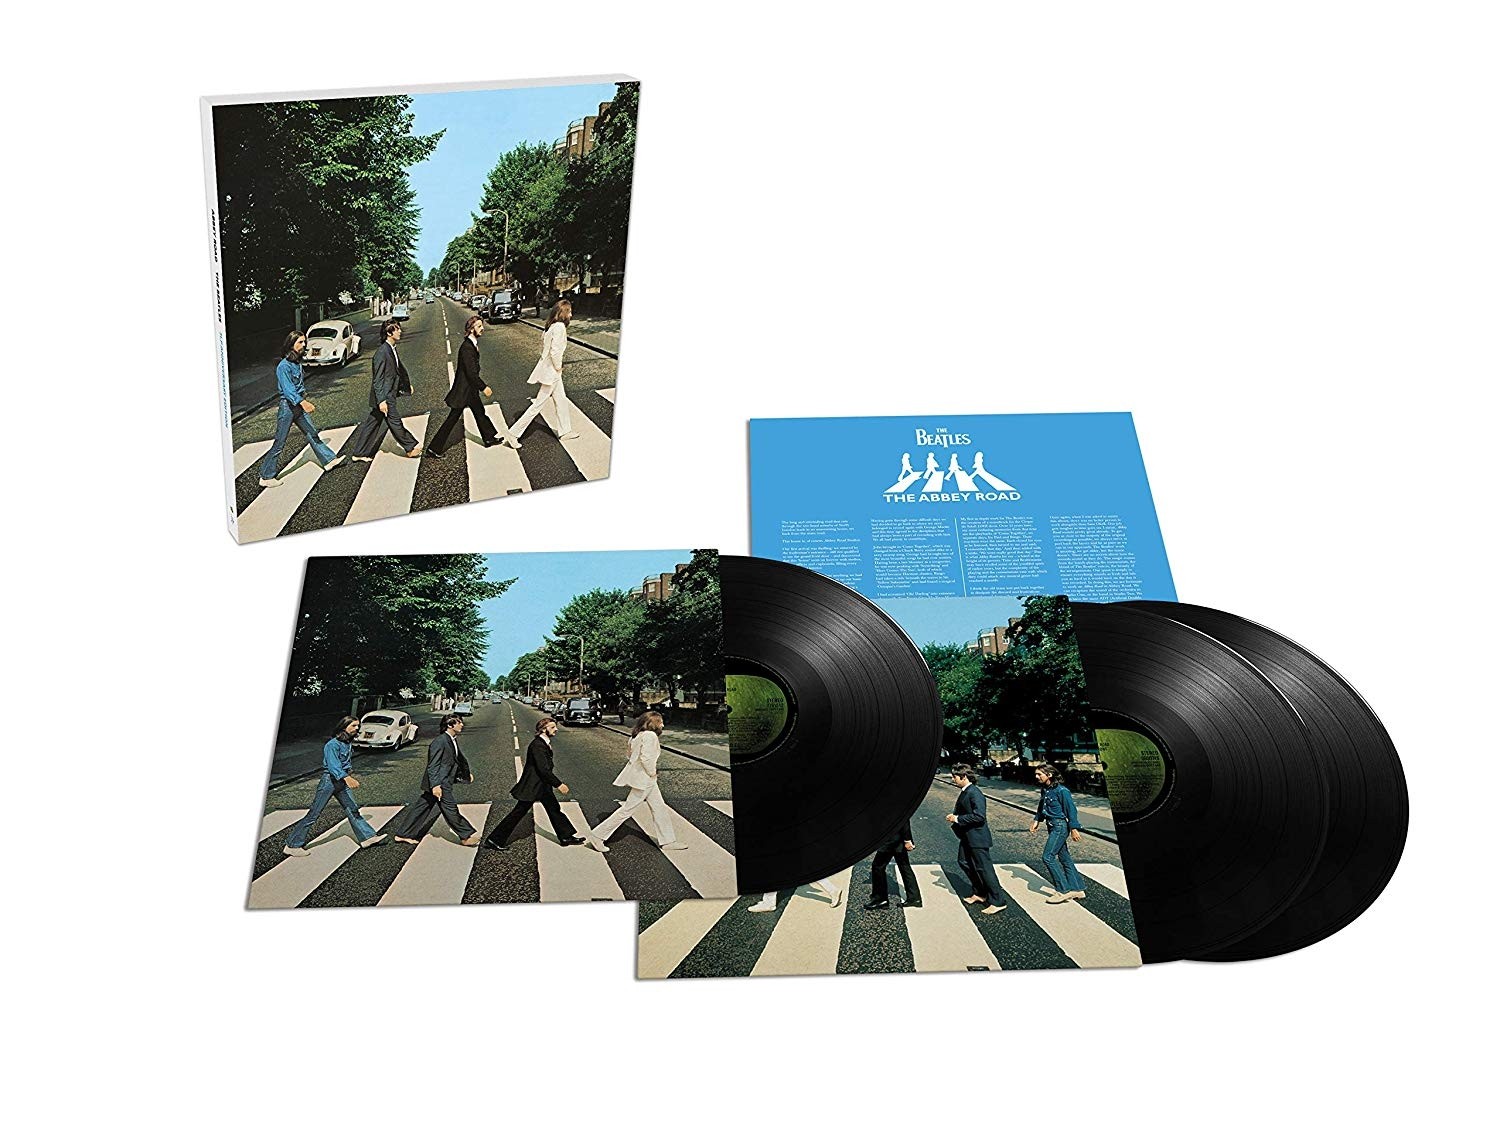 The Beatles - Abbey Road Anniversary (Deluxe) 3XLP